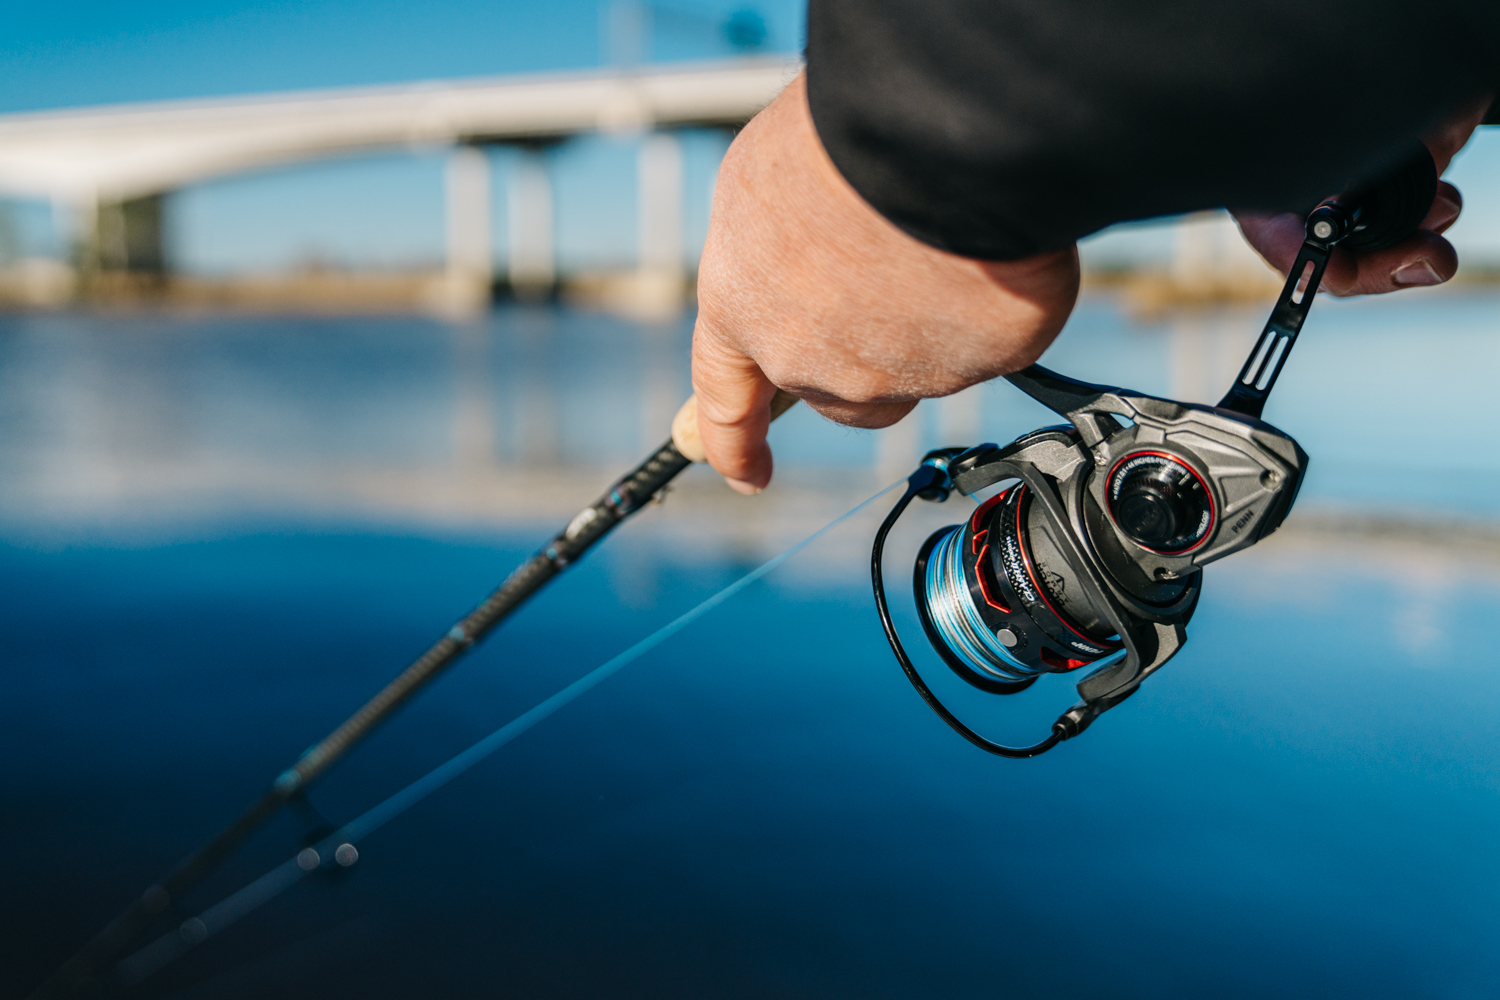 The PENN SLAMMER IV is the Ultimate Workhorse - Fishing Tackle Retailer -  The Business Magazine of the Sportfishing Industry